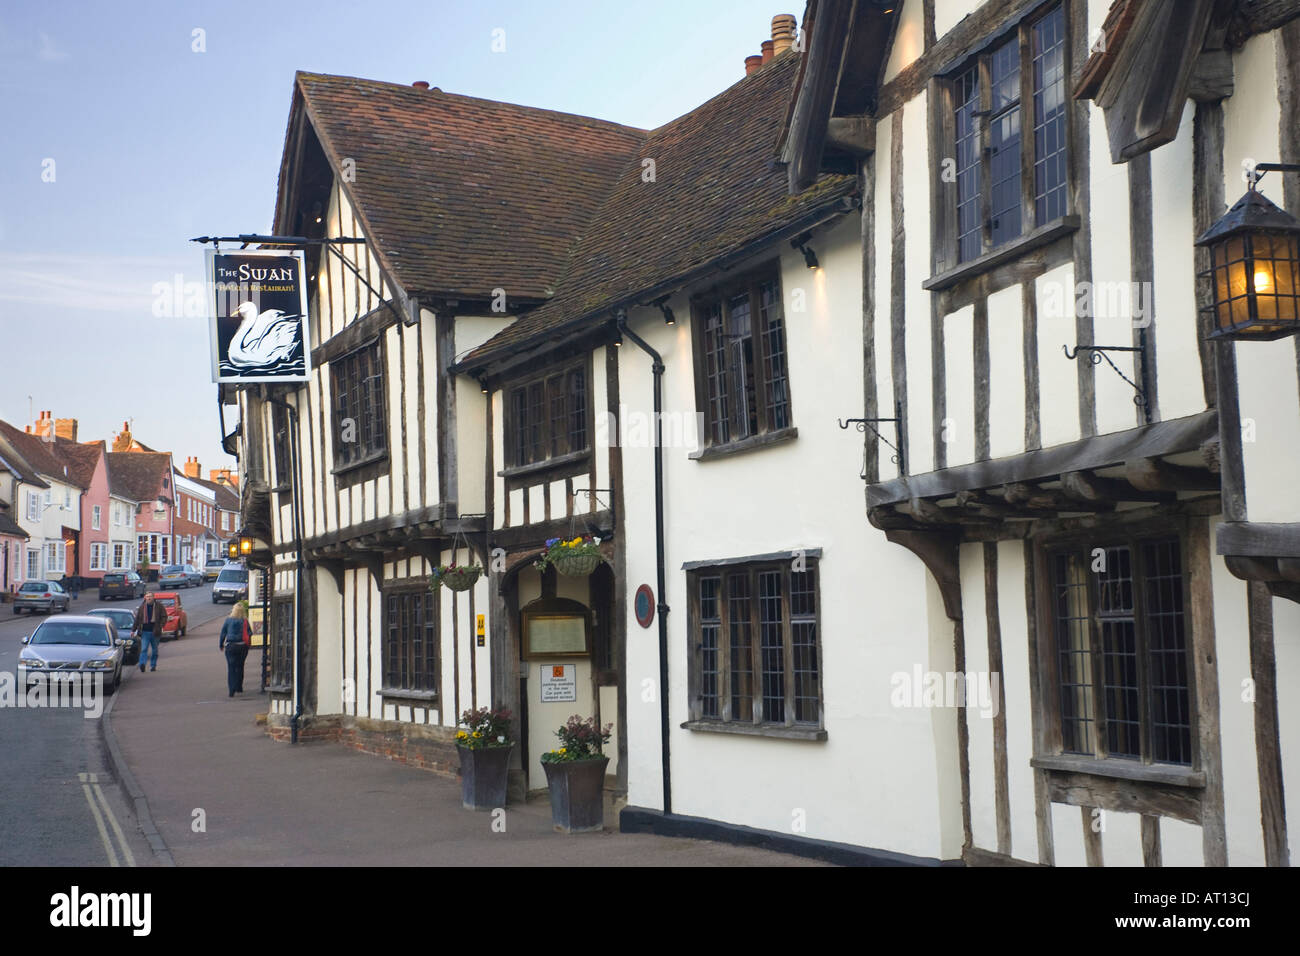 The famous Swan Hotel and Restaurant in Lavenham, Suffolk, UK, 2008 Stock Photo